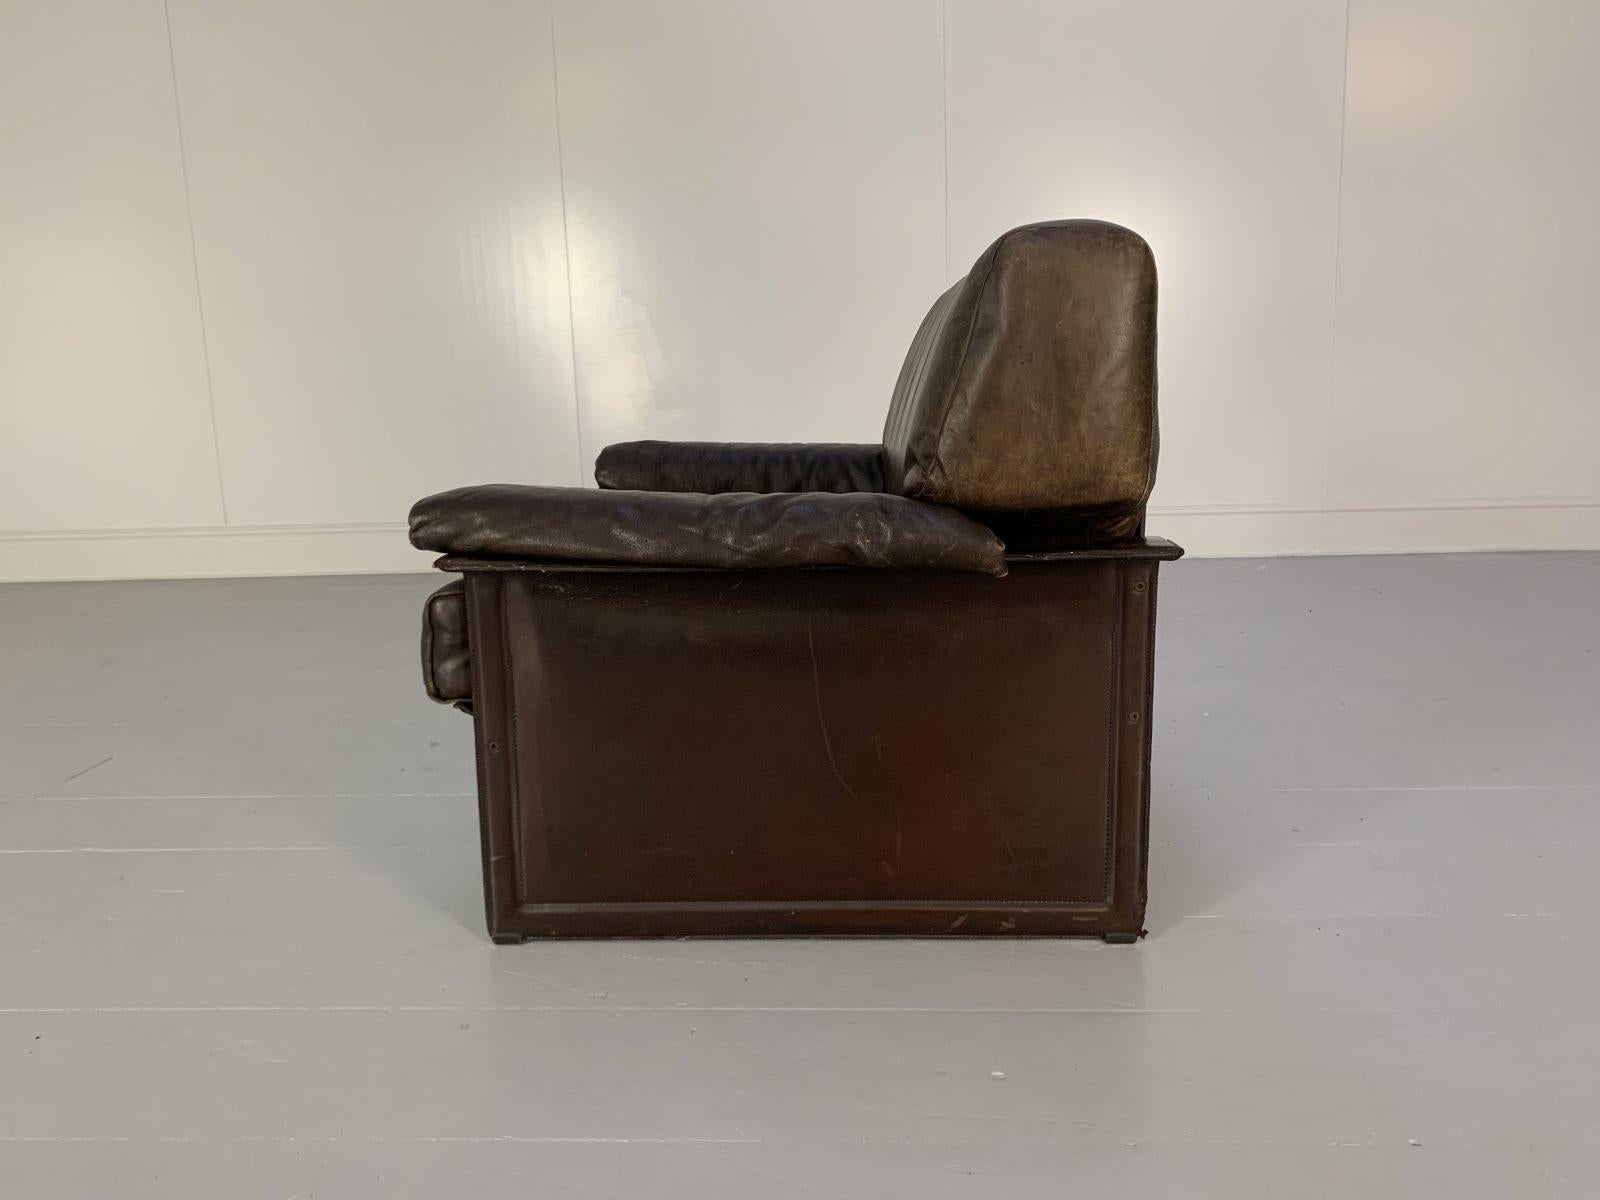 Pair of Matteo Grassi “Tm” Armchairs – in Vintage Brown Leather For Sale 5